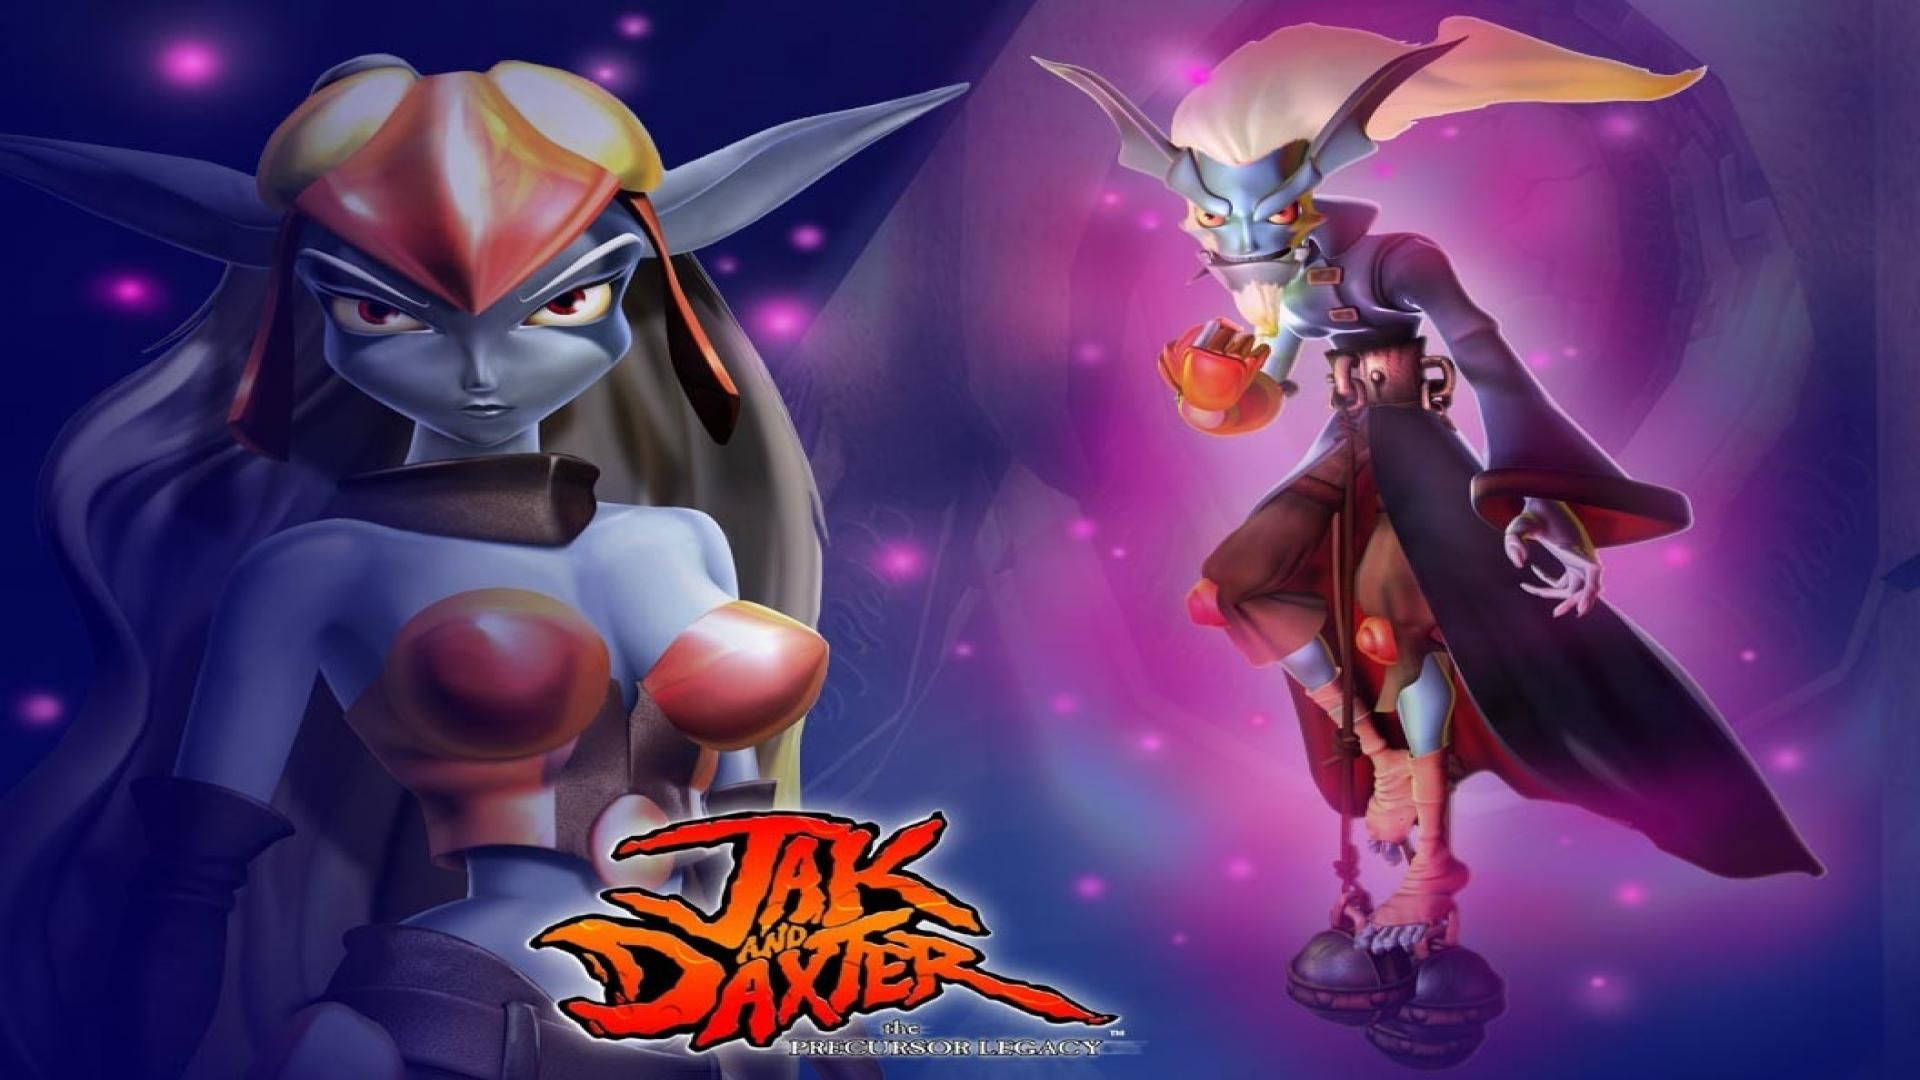 The iconic duo, Jak and Daxter, take on a magical adventure. Wallpaper